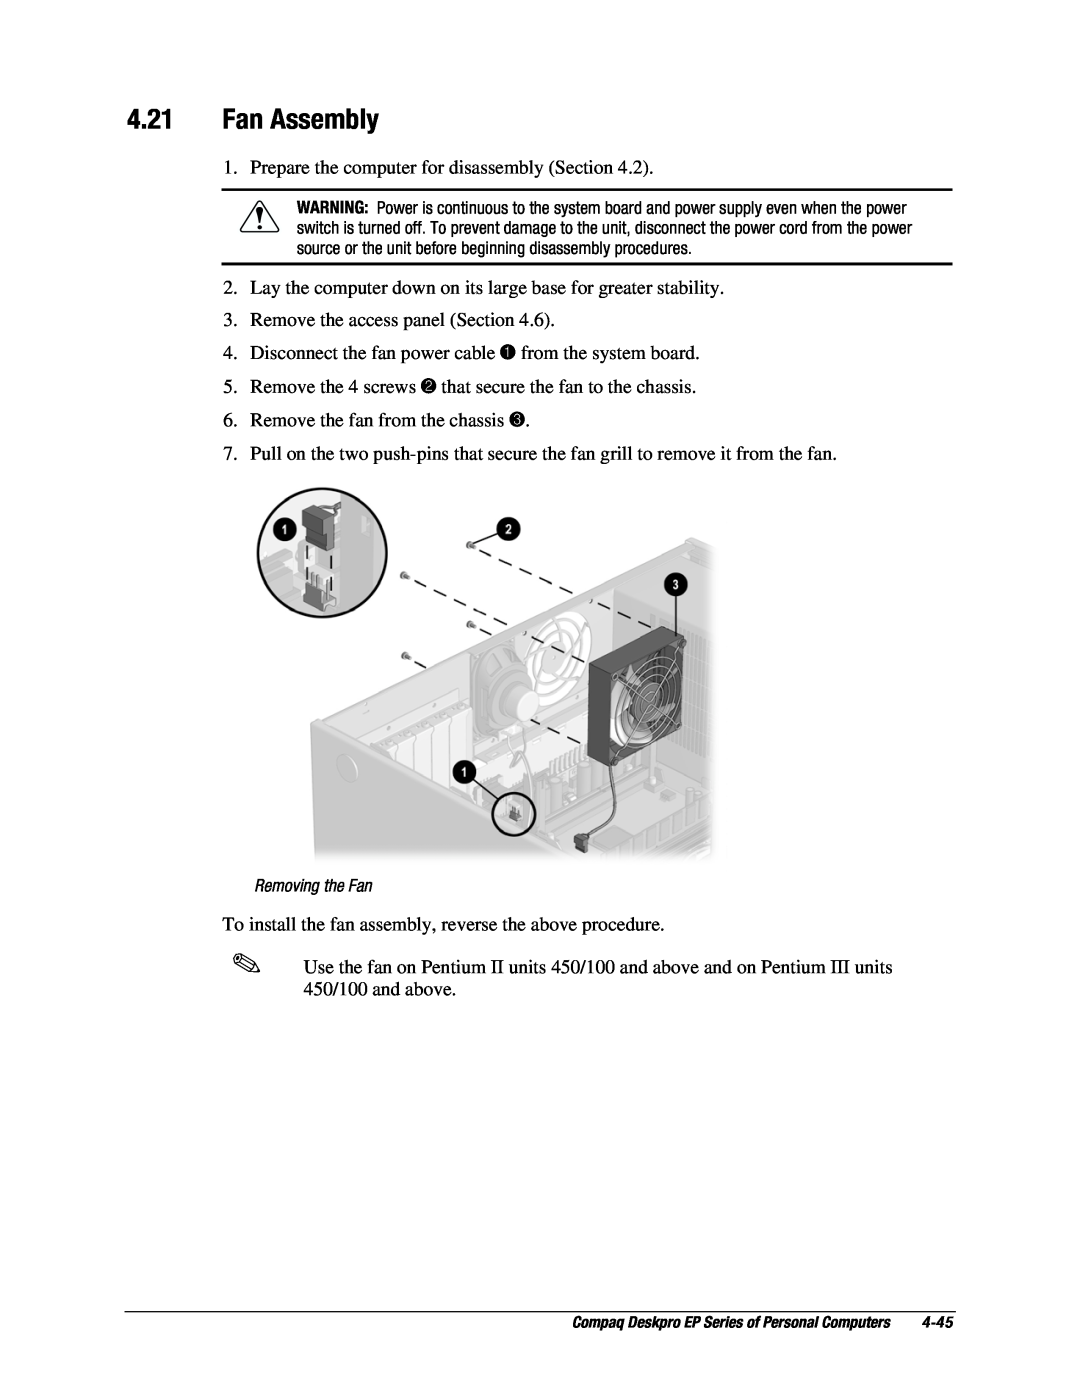 Compaq EP Series manual Fan Assembly, Removing the Fan 